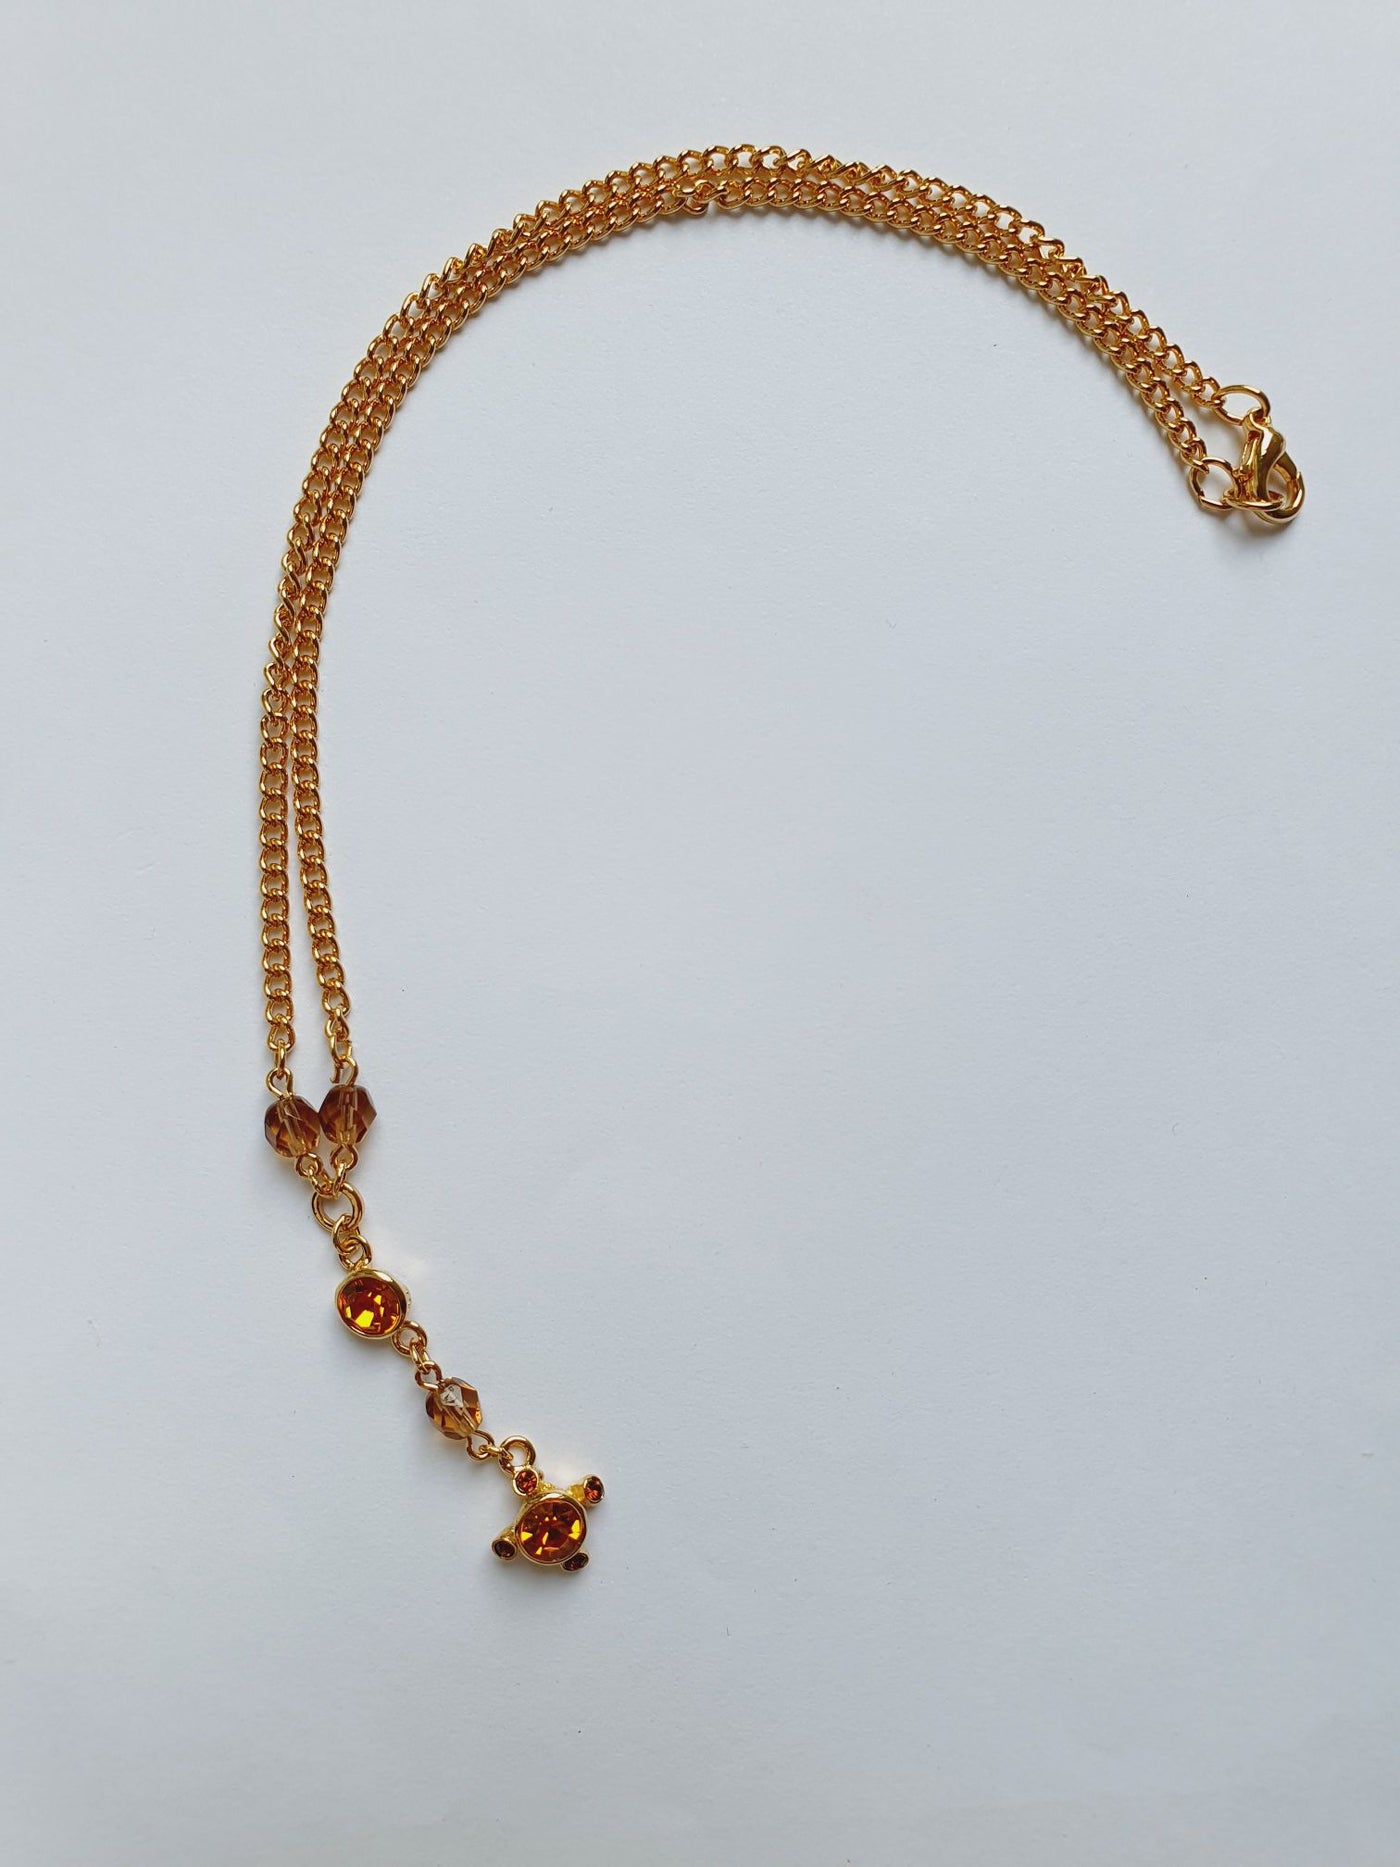 Vintage Gold Plated Chain Necklace with Copper Crystals